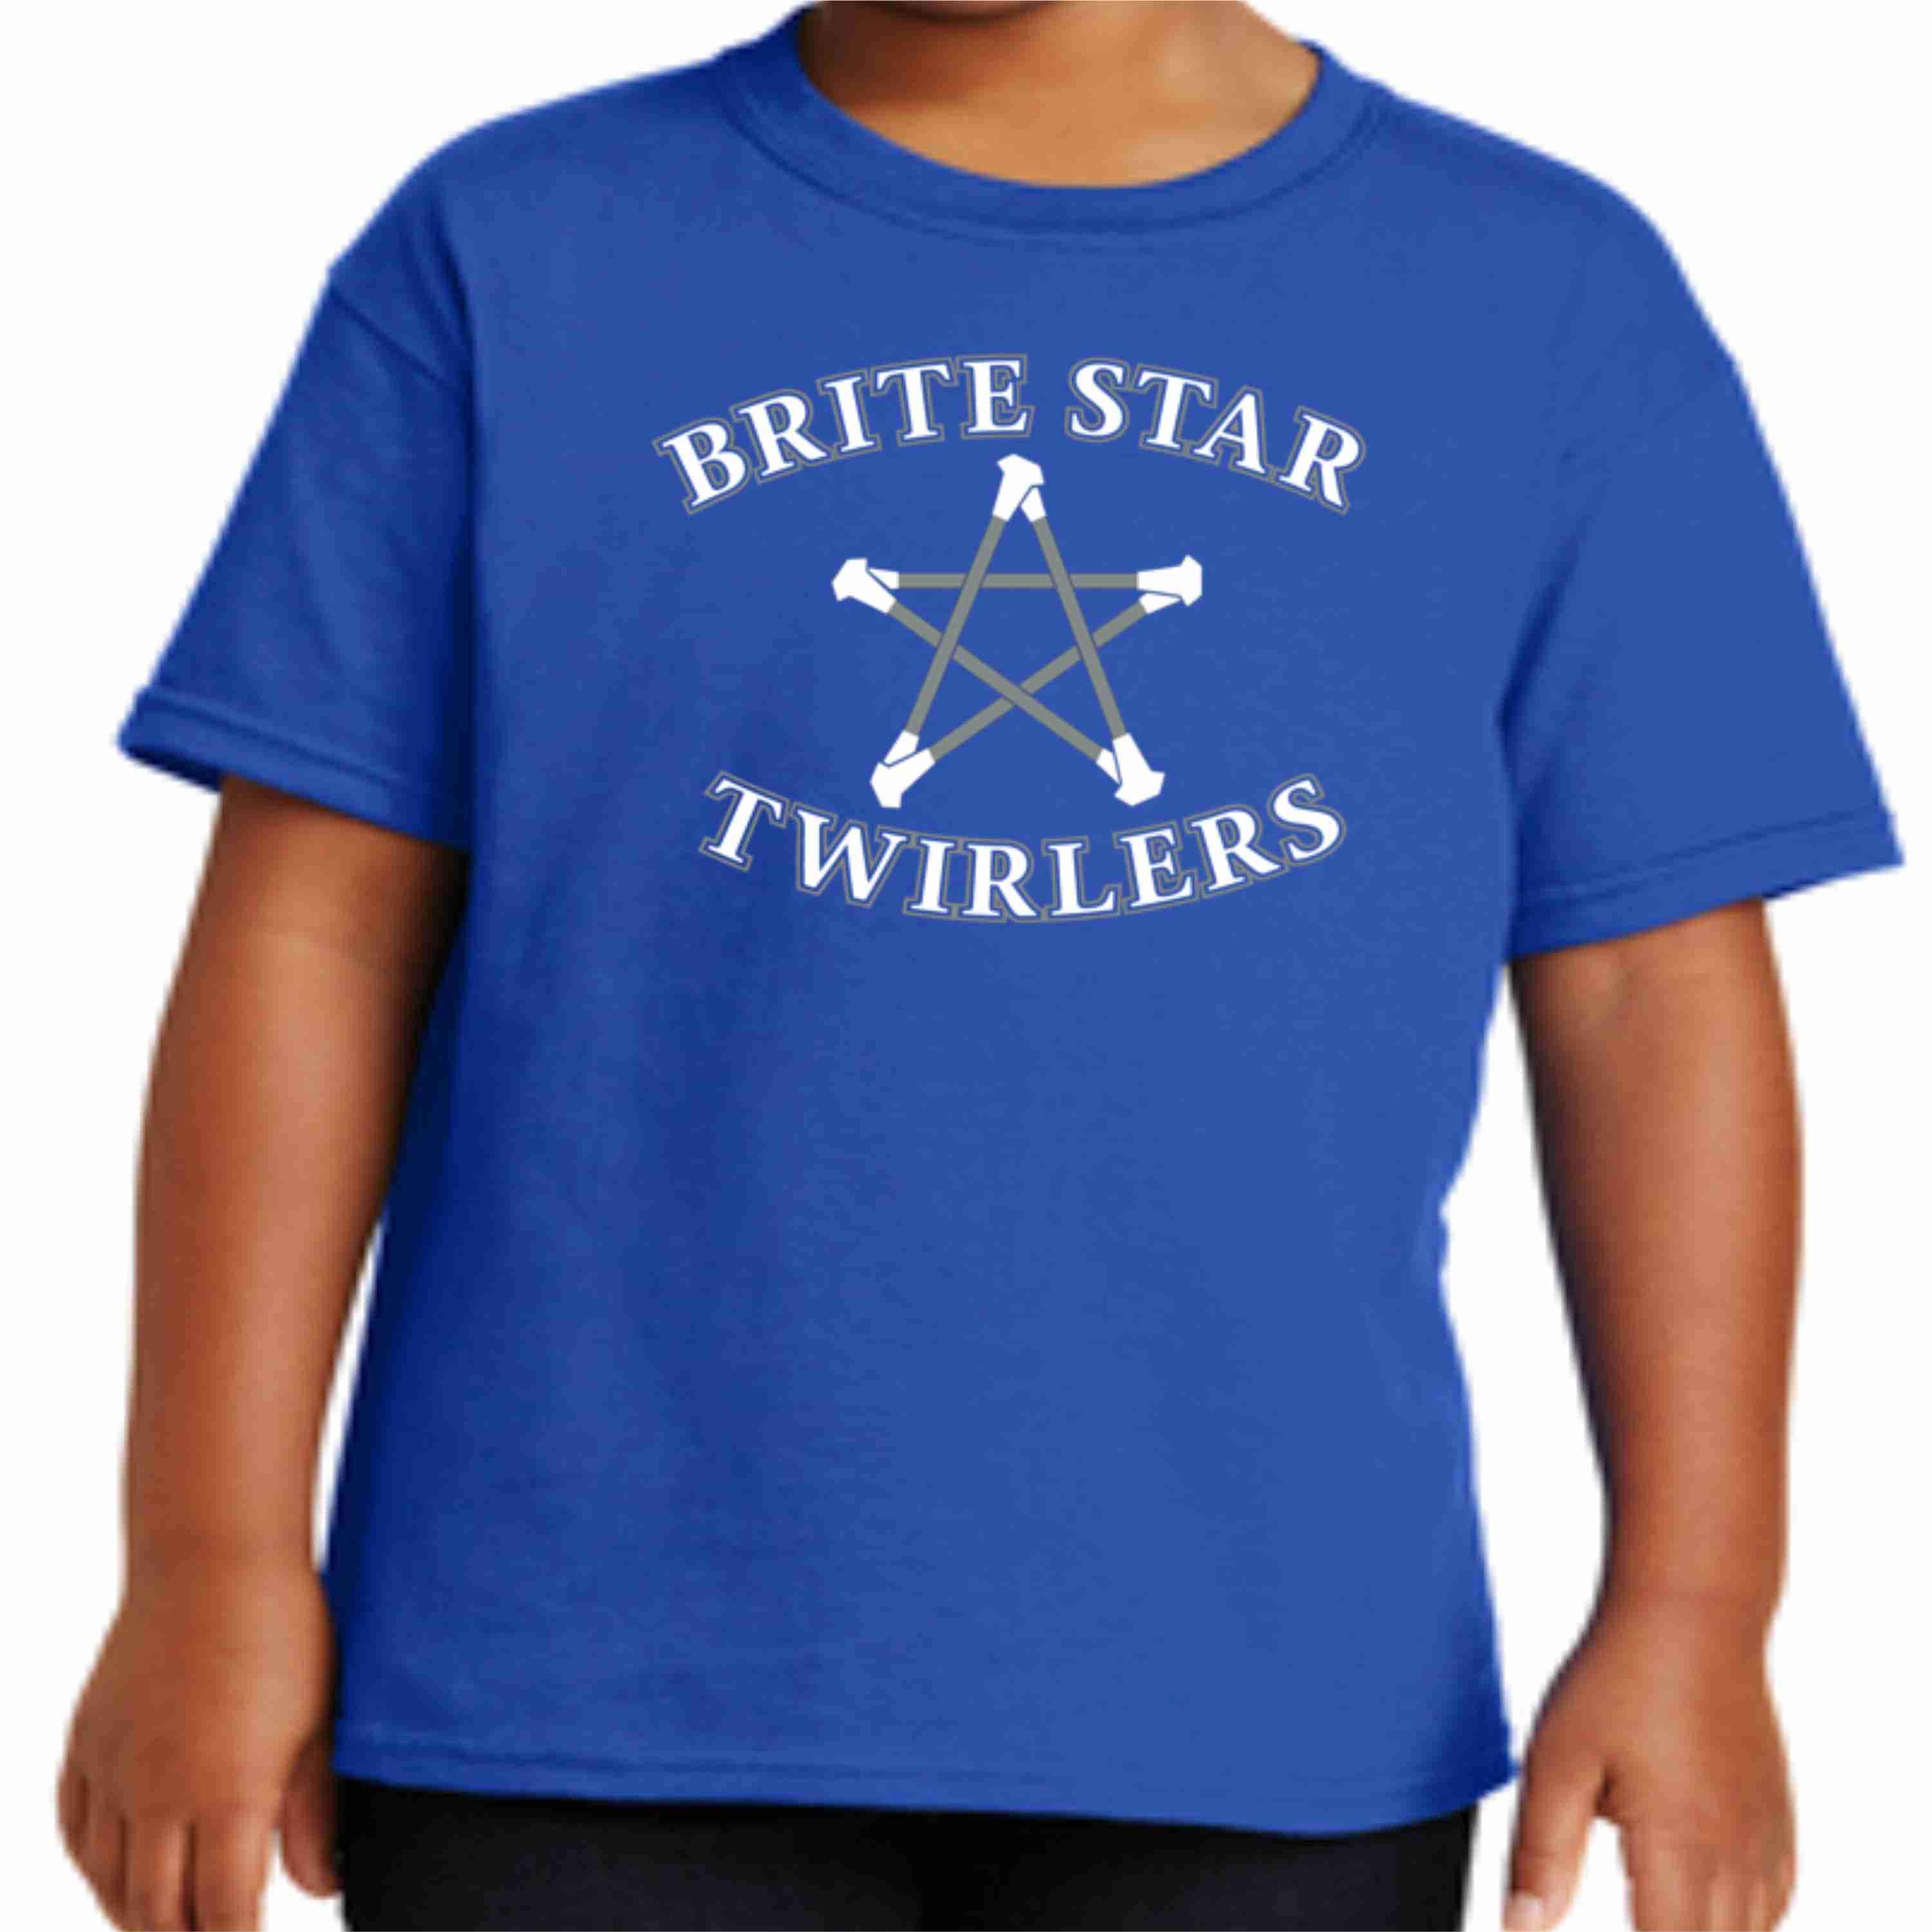 Brite Star Twirlers- Youth Short Sleeve Crew Neck Screen Printed Hoodie Beckys-Boutique.com Small Blue 